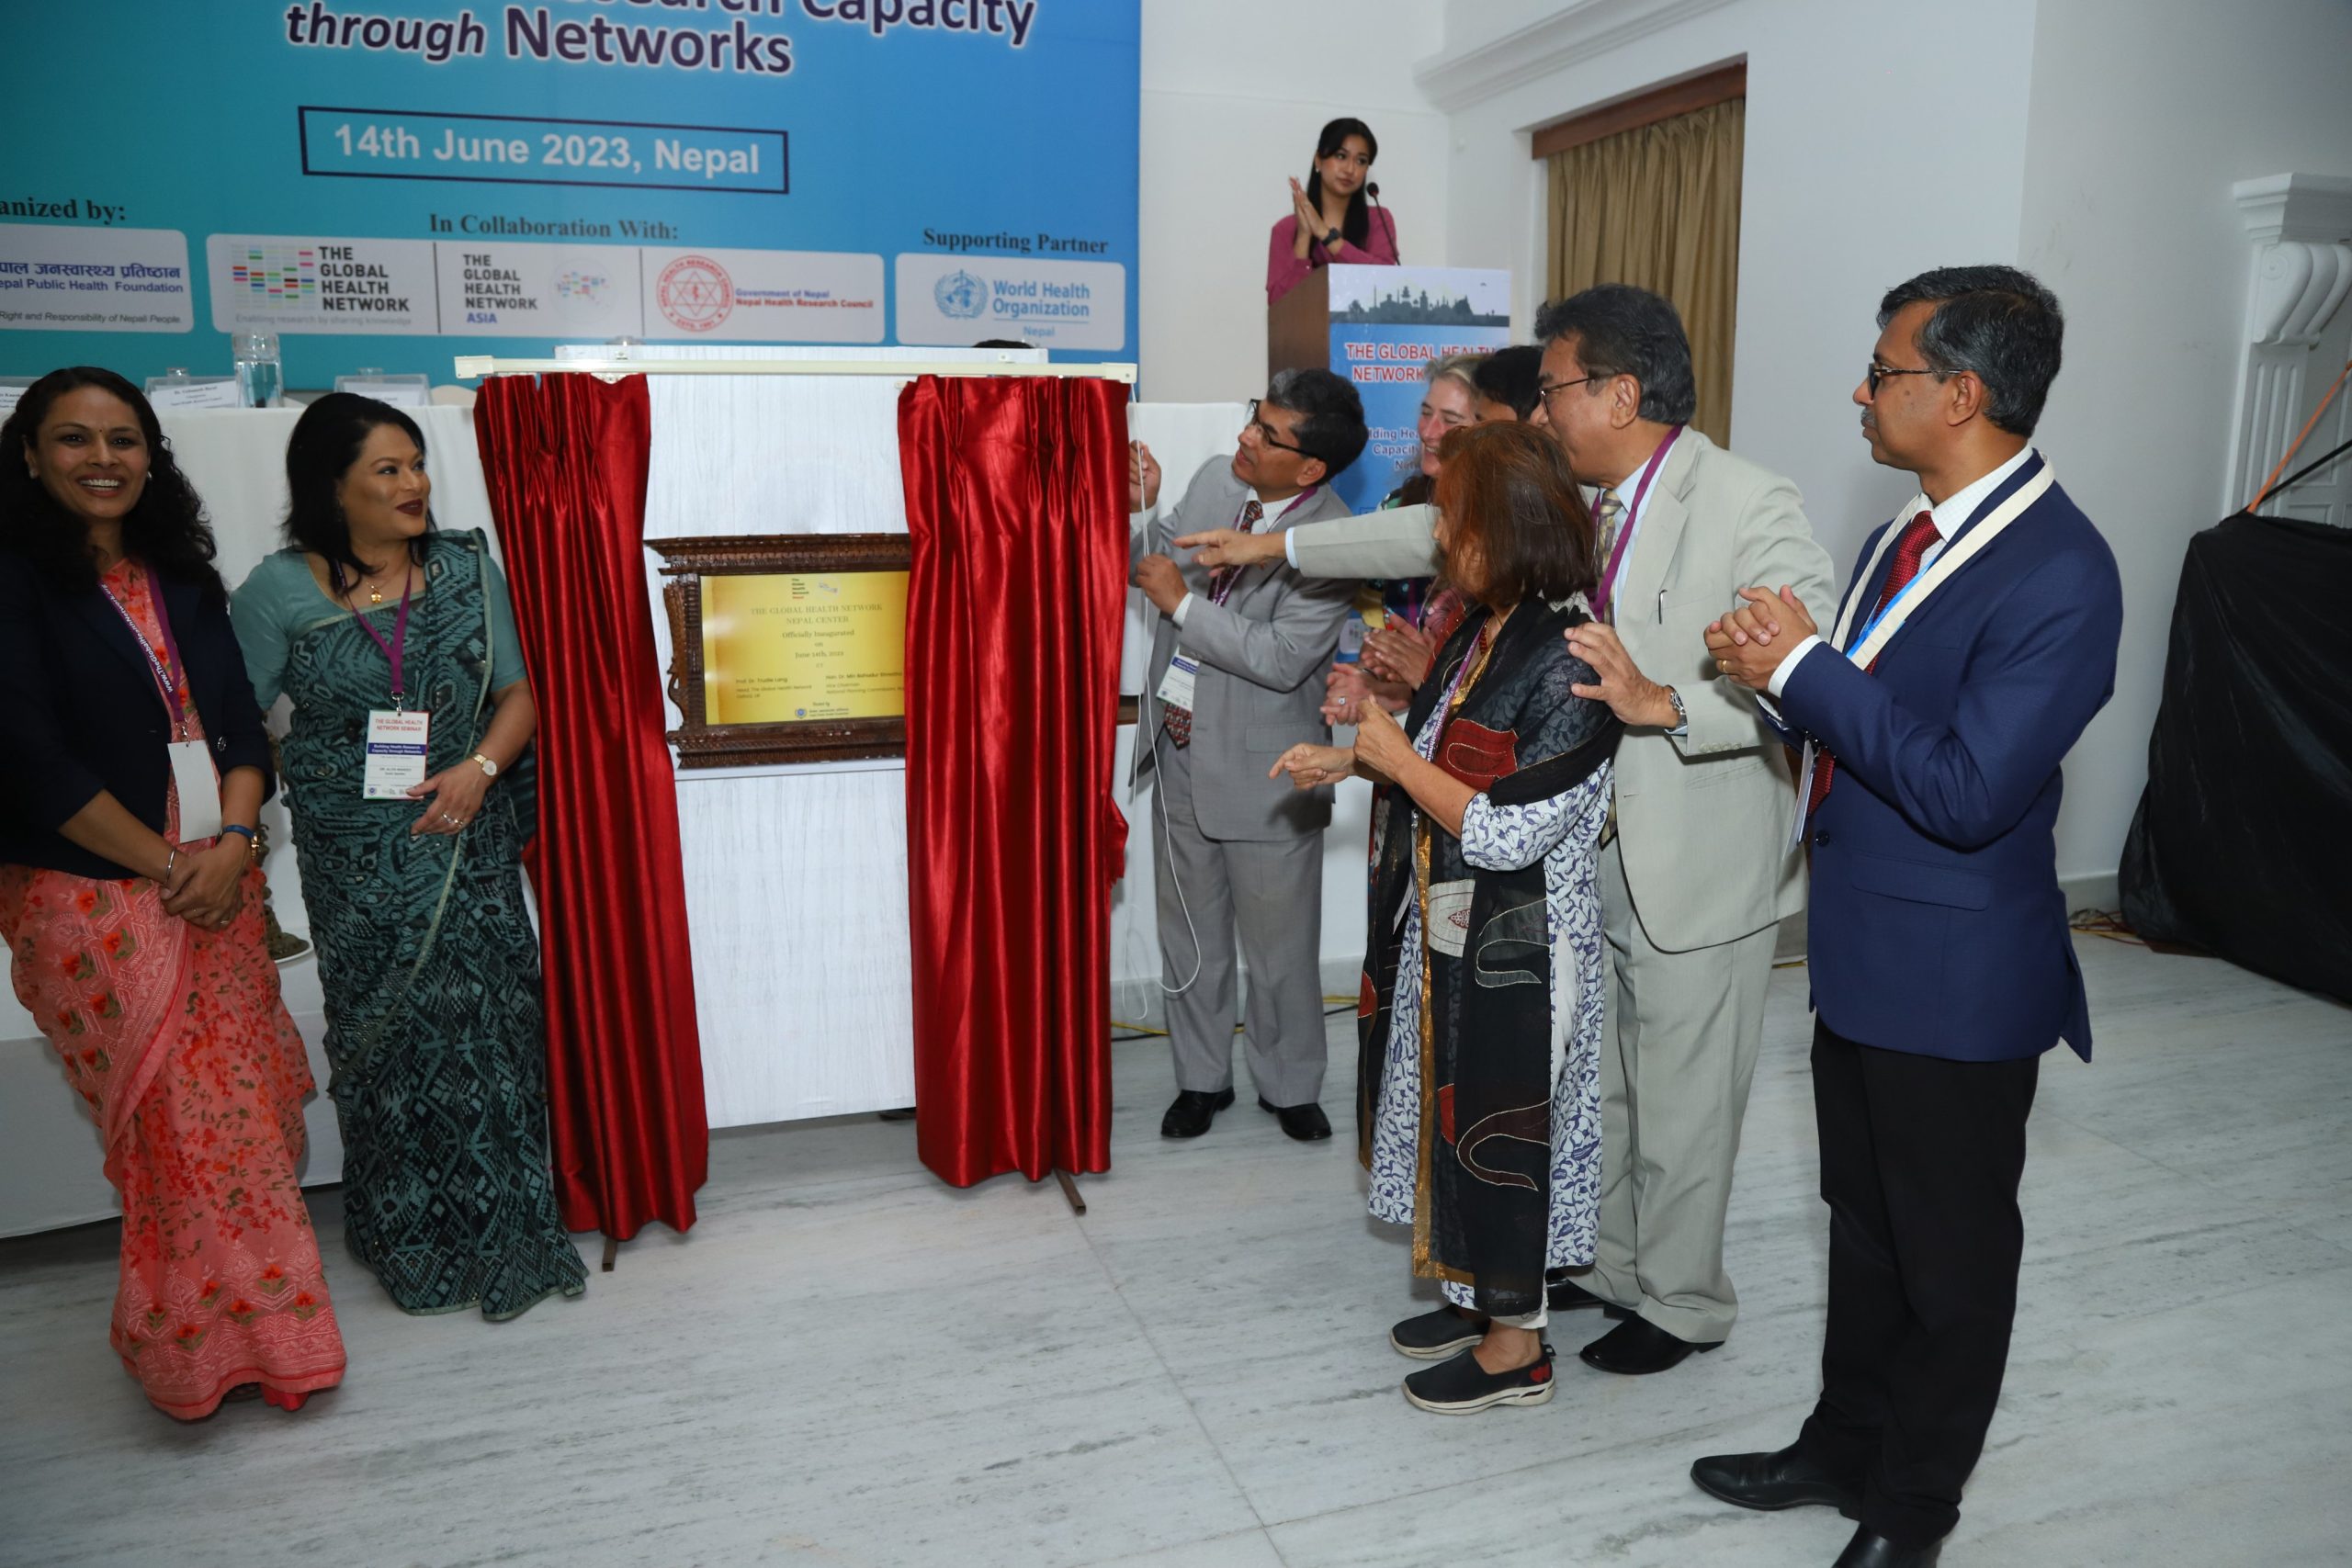 Launching of The Global Health Network  Nepal Center